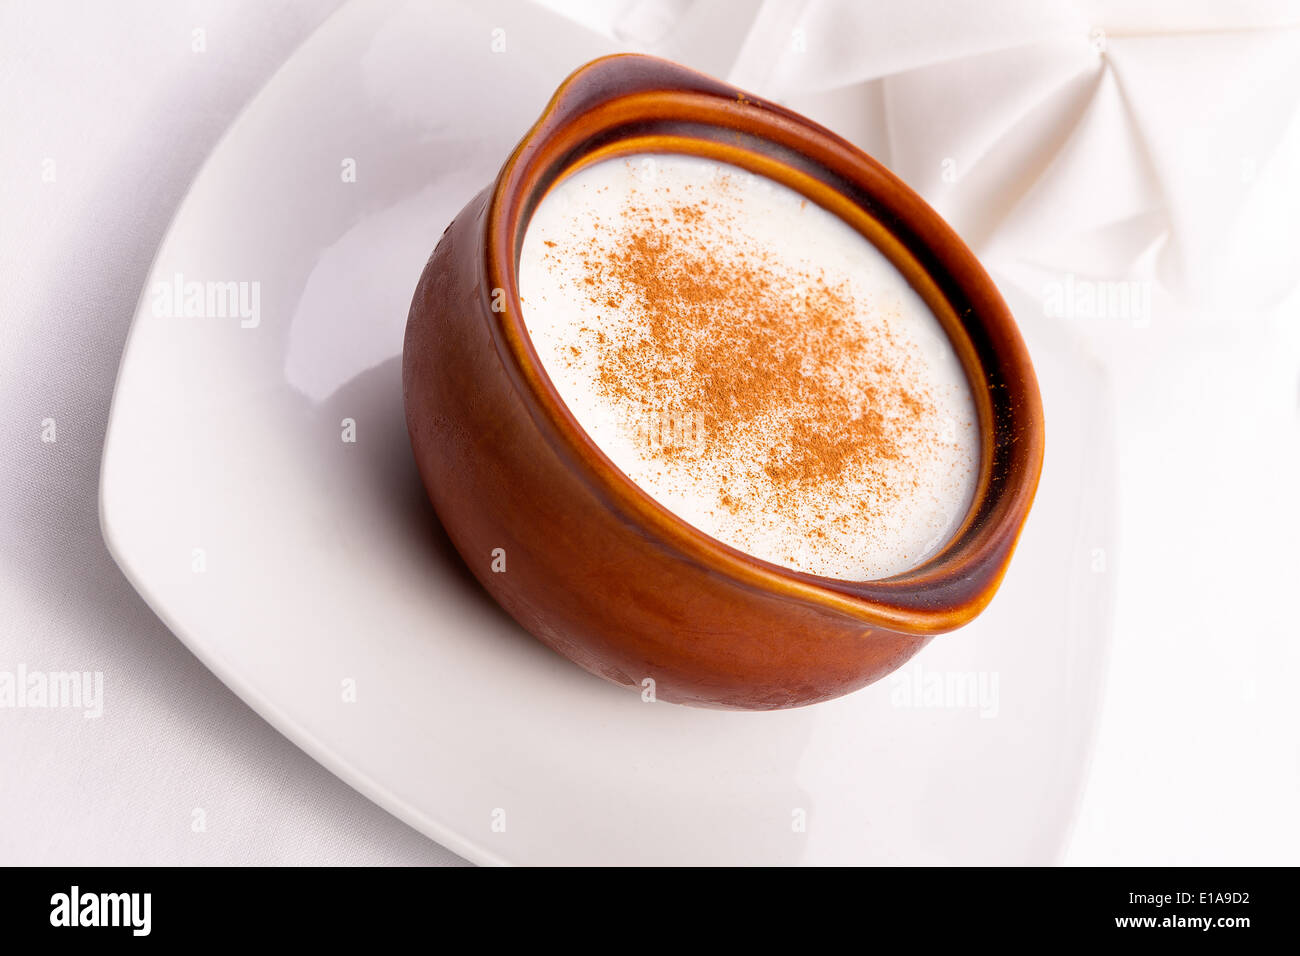 Plain rice pudding with cinnamon on top of in in brown casserole Stock Photo